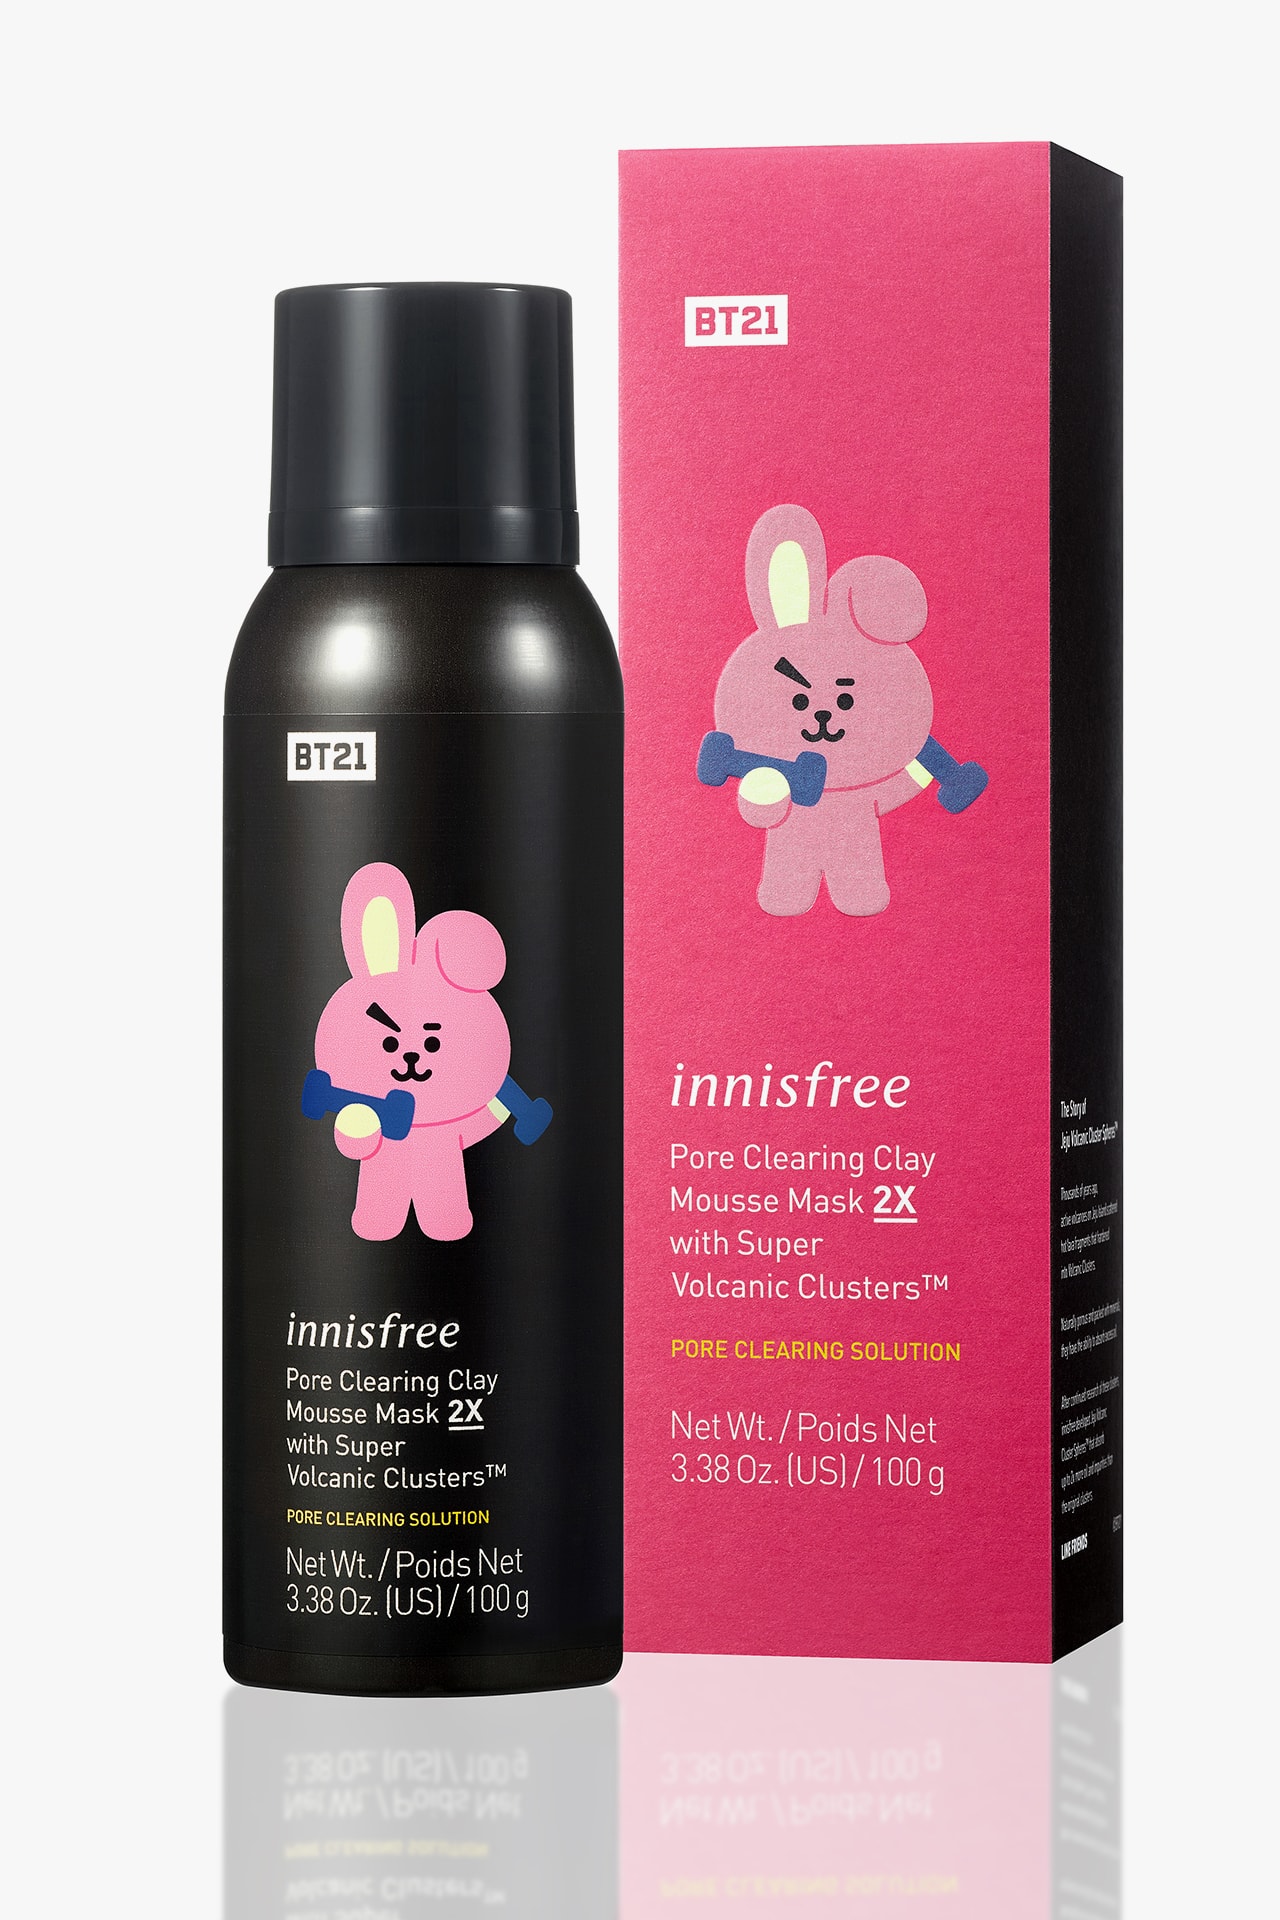 BT21 innisfree Limited Edition Skincare Collaboration BTS K-pop Line Friends Characters K-Beauty Korean Korea Pore Clearing Clay Mousse Mask 2X with Super Volcanic Clusters